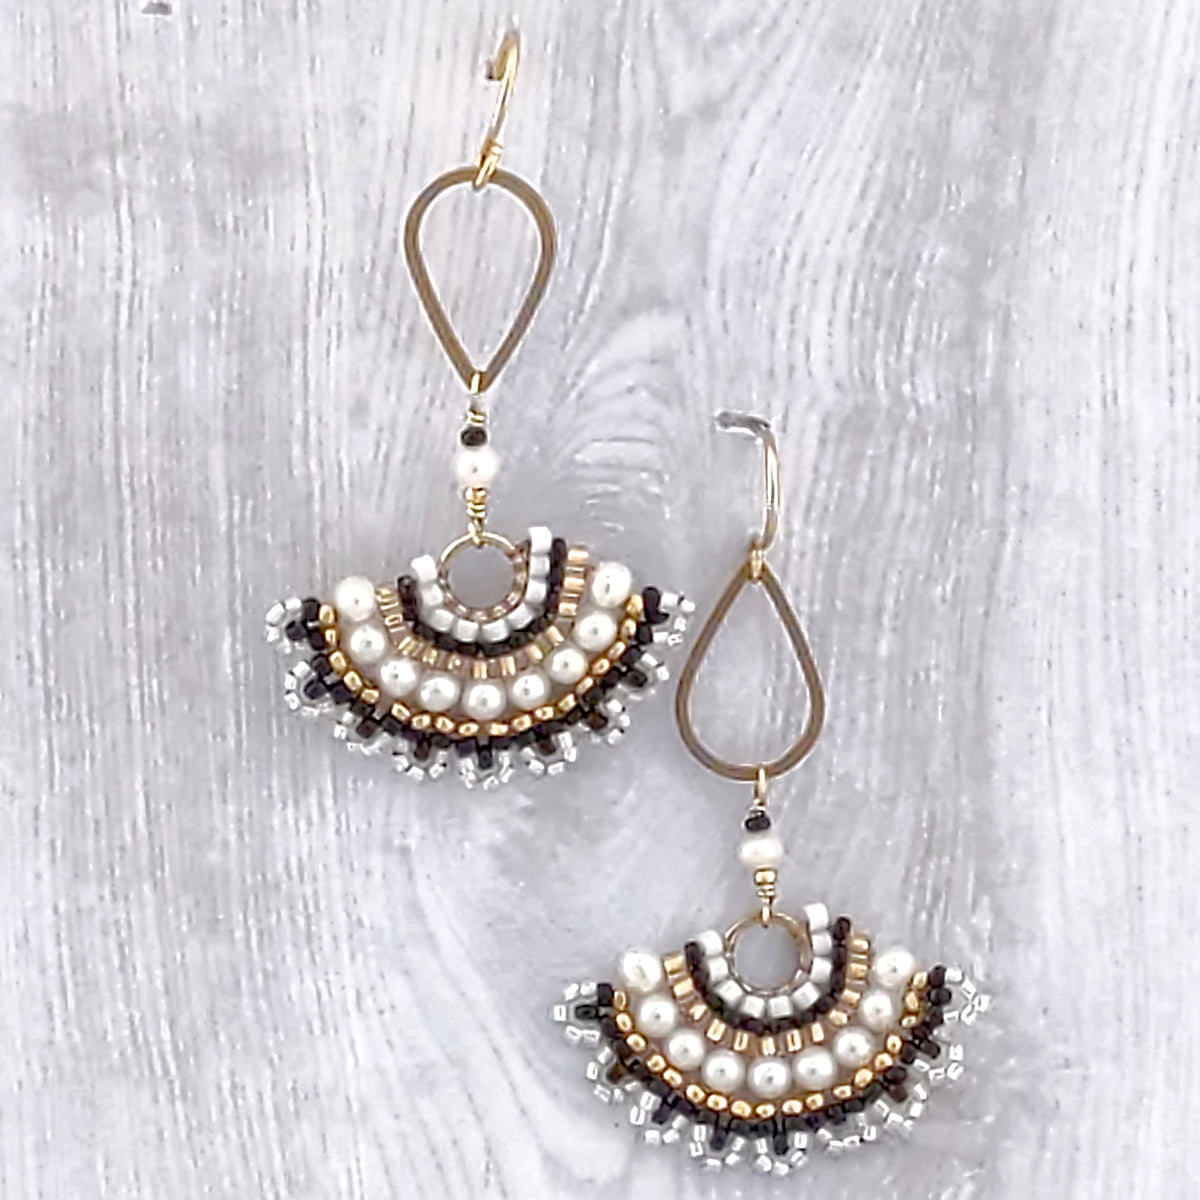 Seven Ways to Catalina Earrings